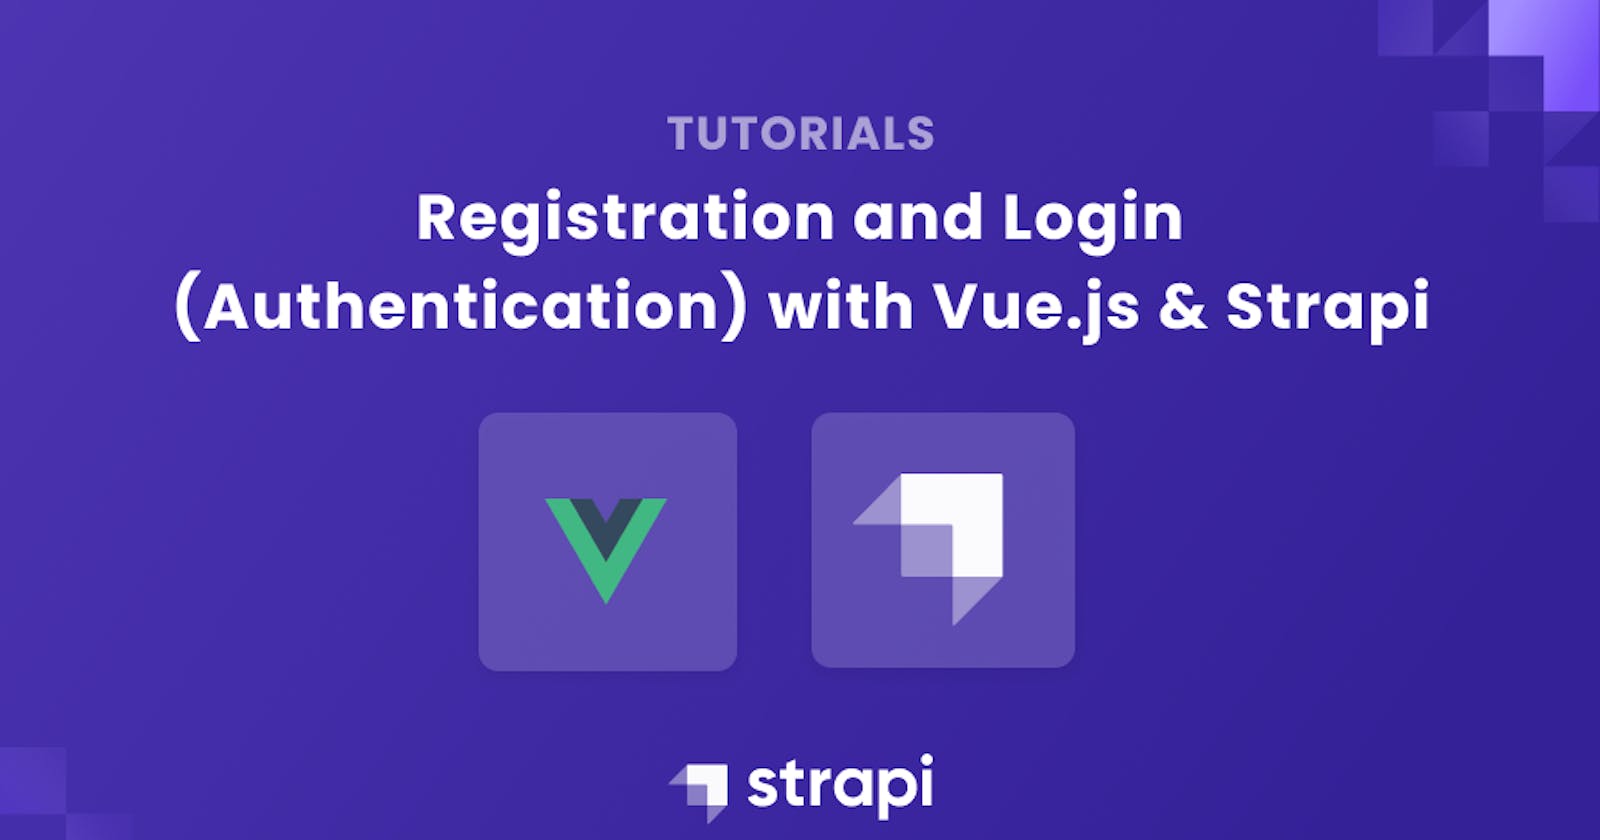 Registration and Login (Authentication) with Vue.js and Strapi